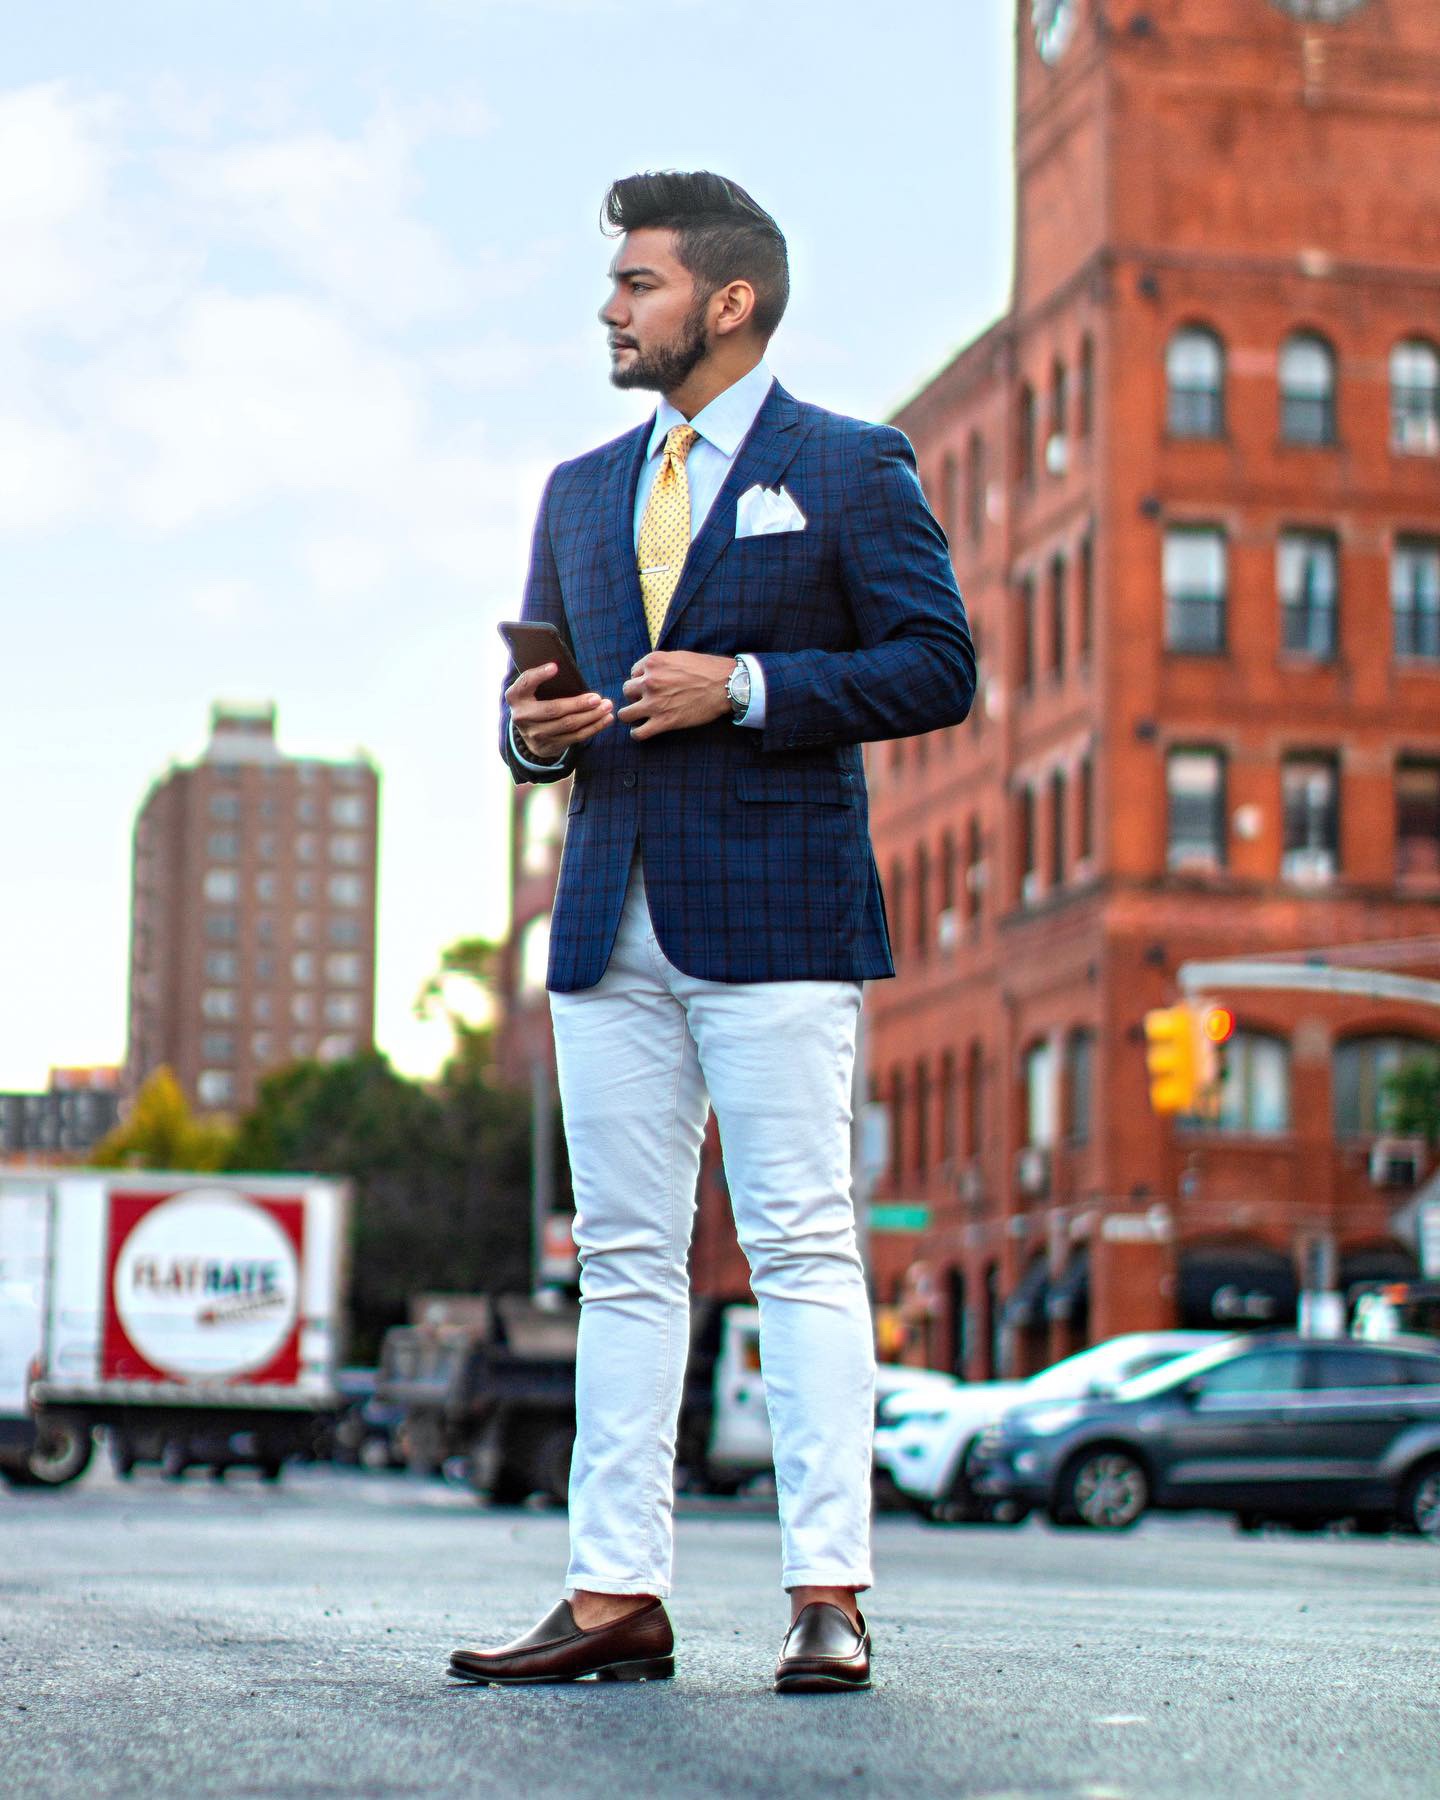 Plaid jacket with skinny fit white jeans, yellow tie - dandy in the bronx